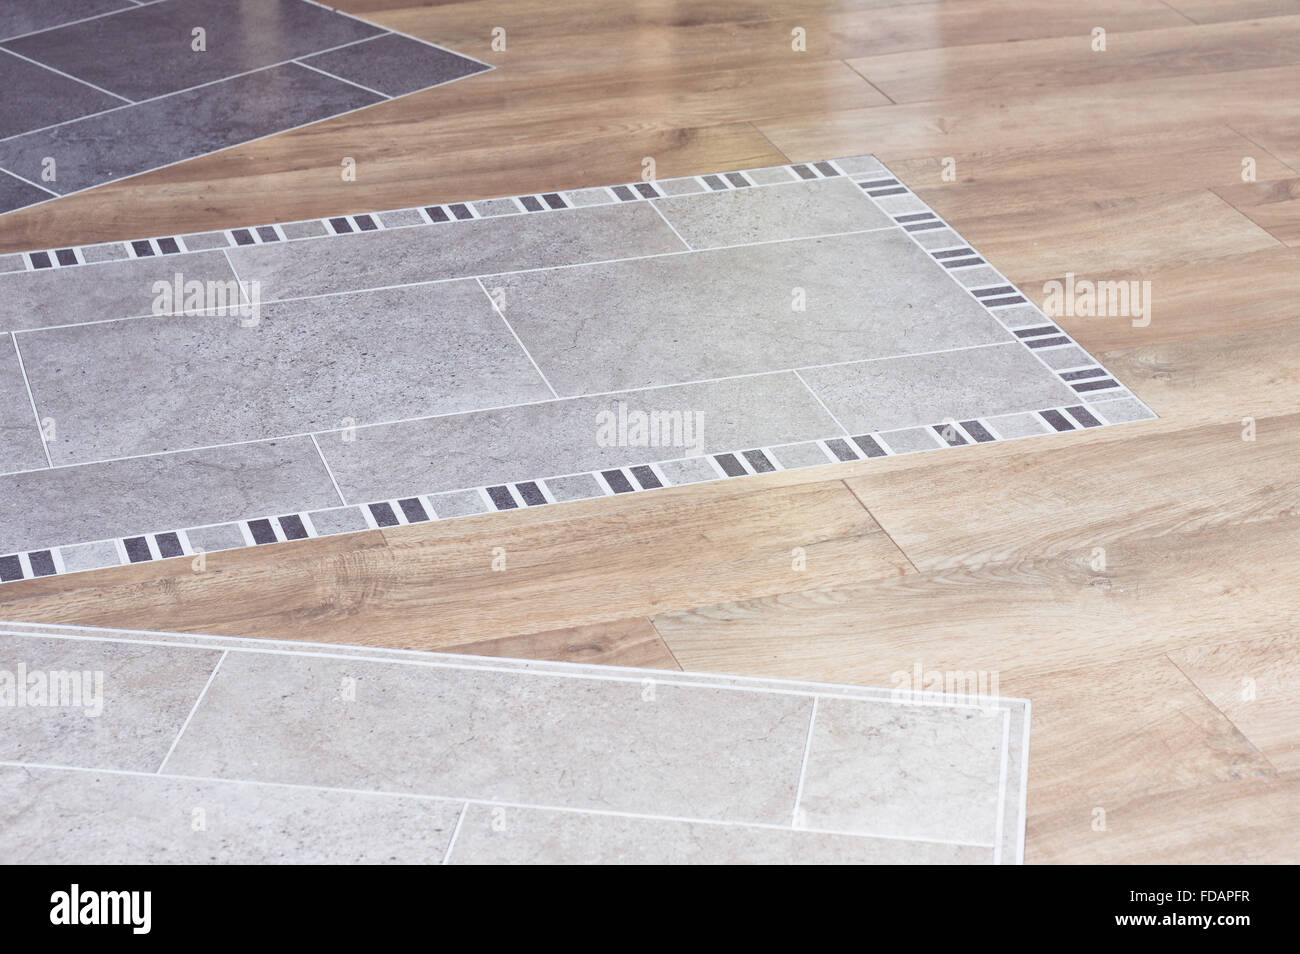 Wood laminate and tiles on the floor of an interior design showroom Stock Photo